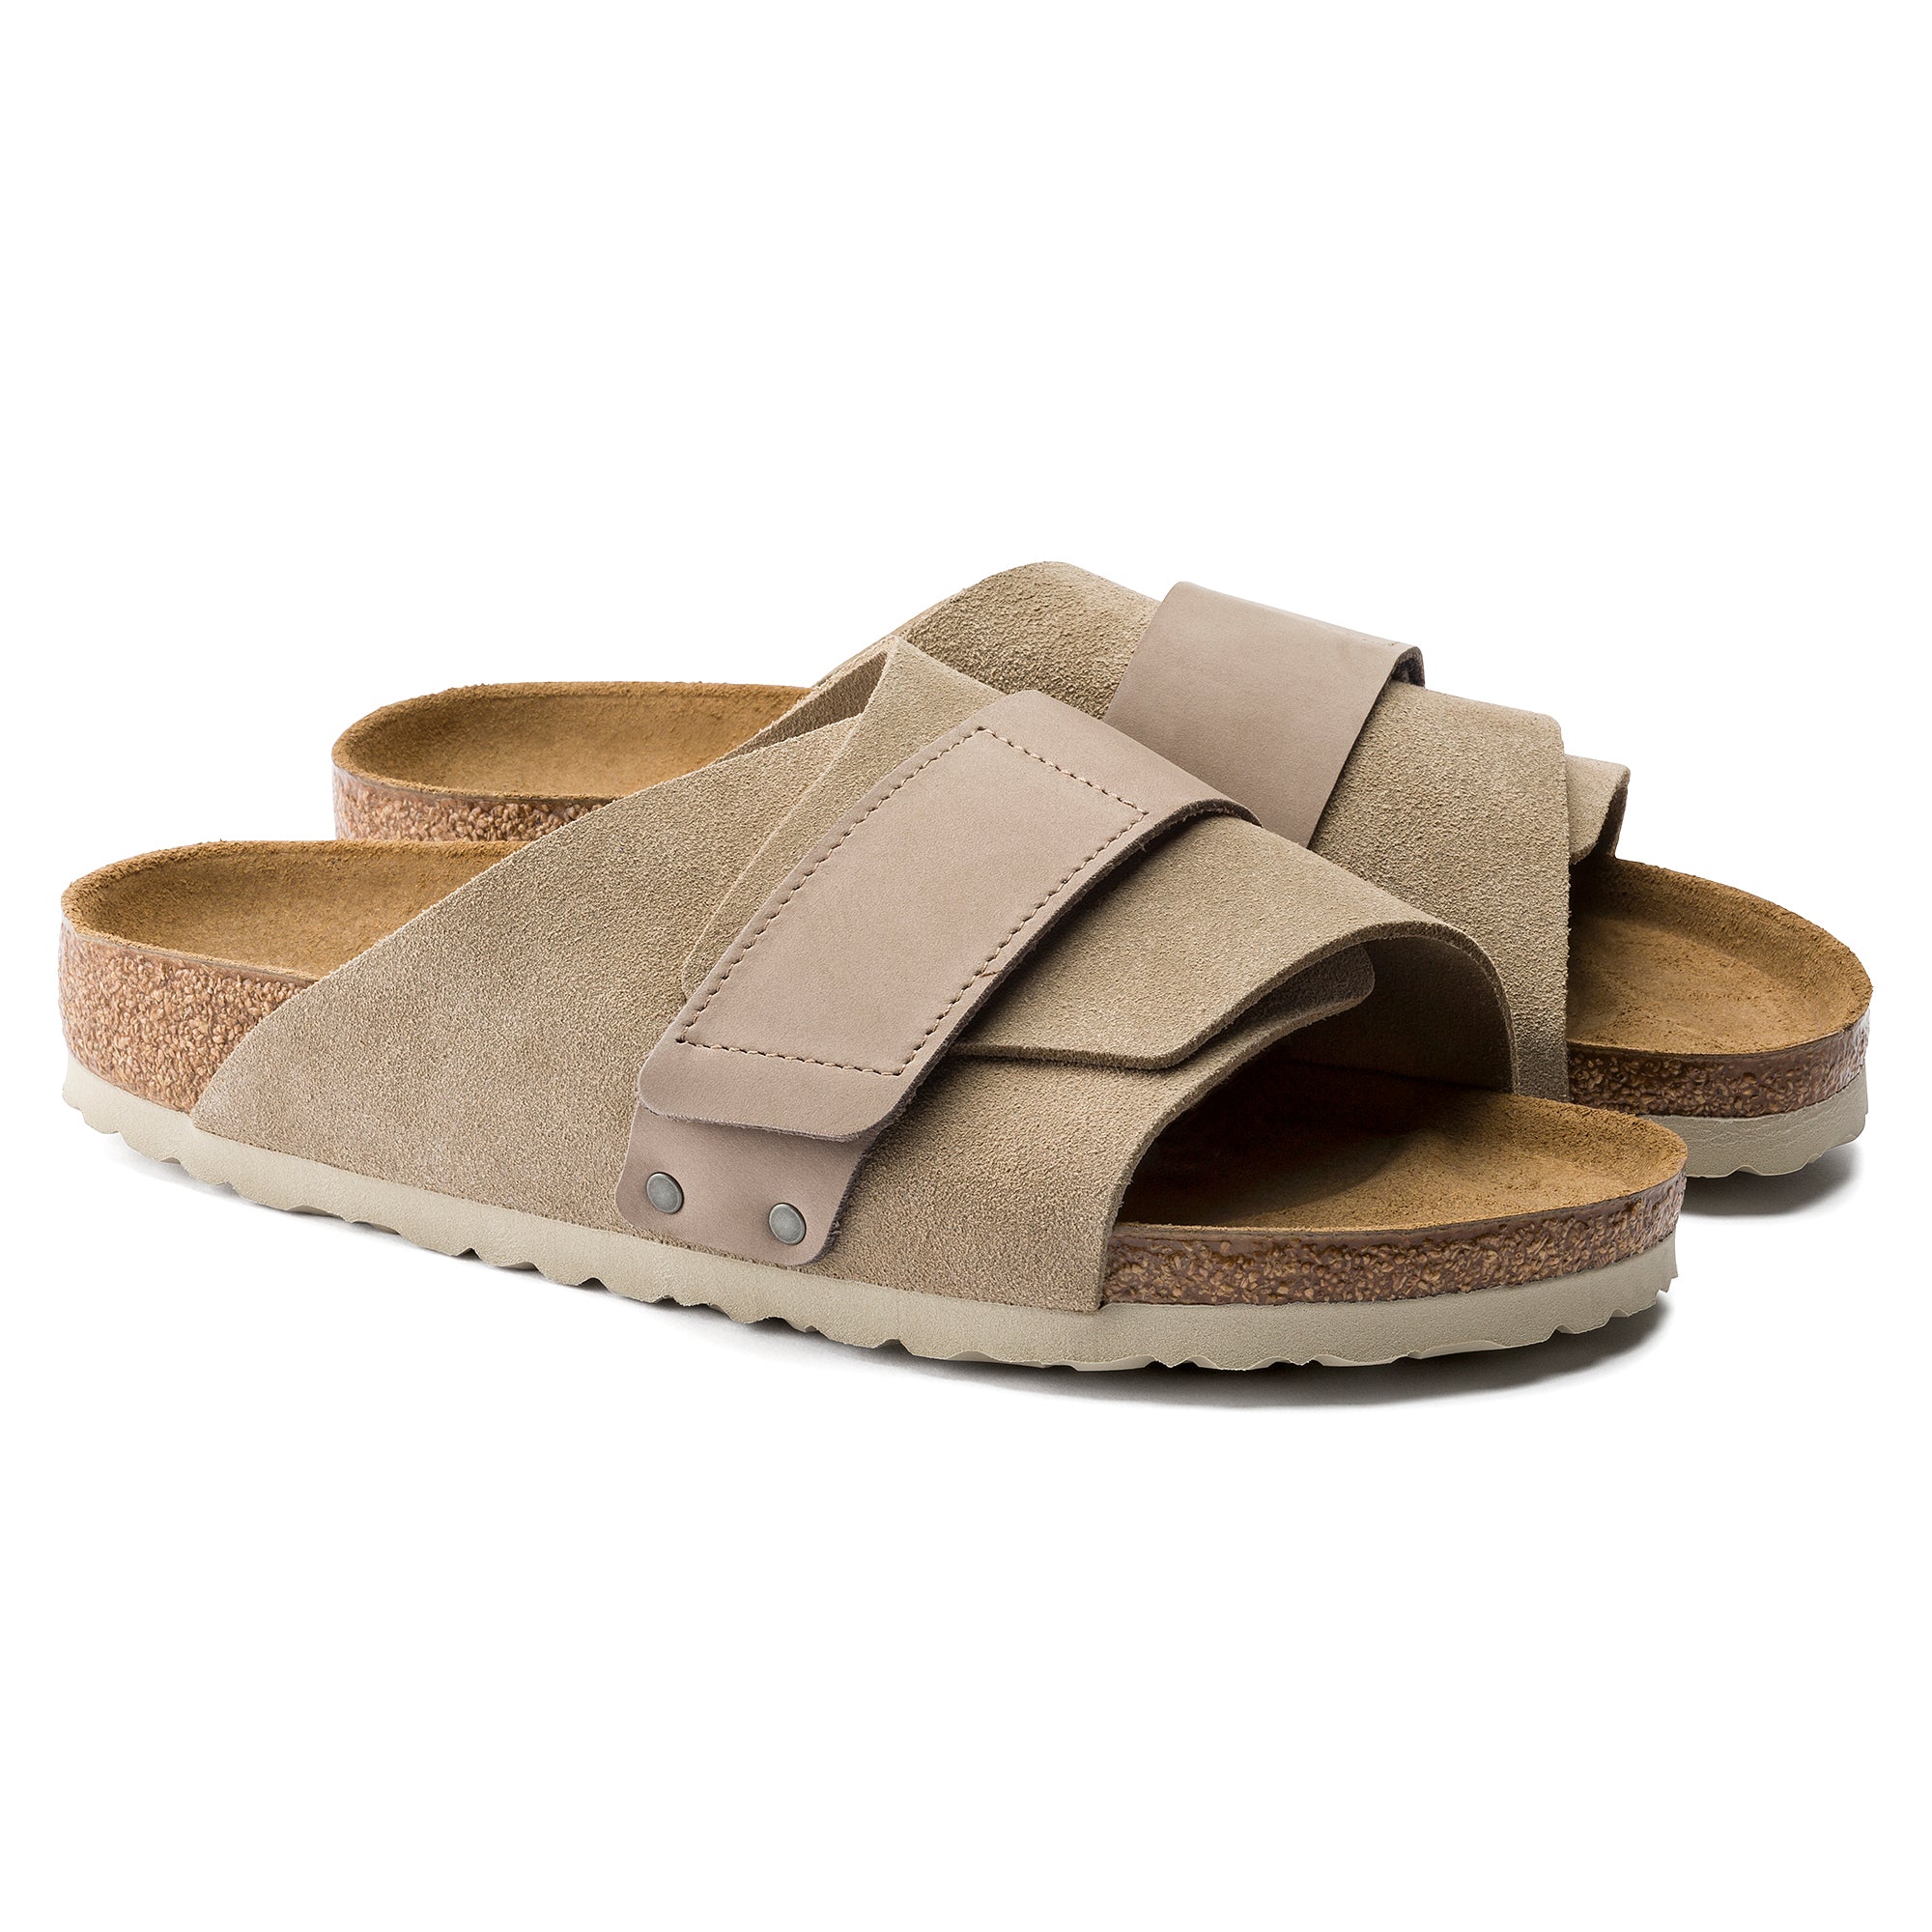 Kyoto Nubuck/Suede Leather in Taupe - Milu James St